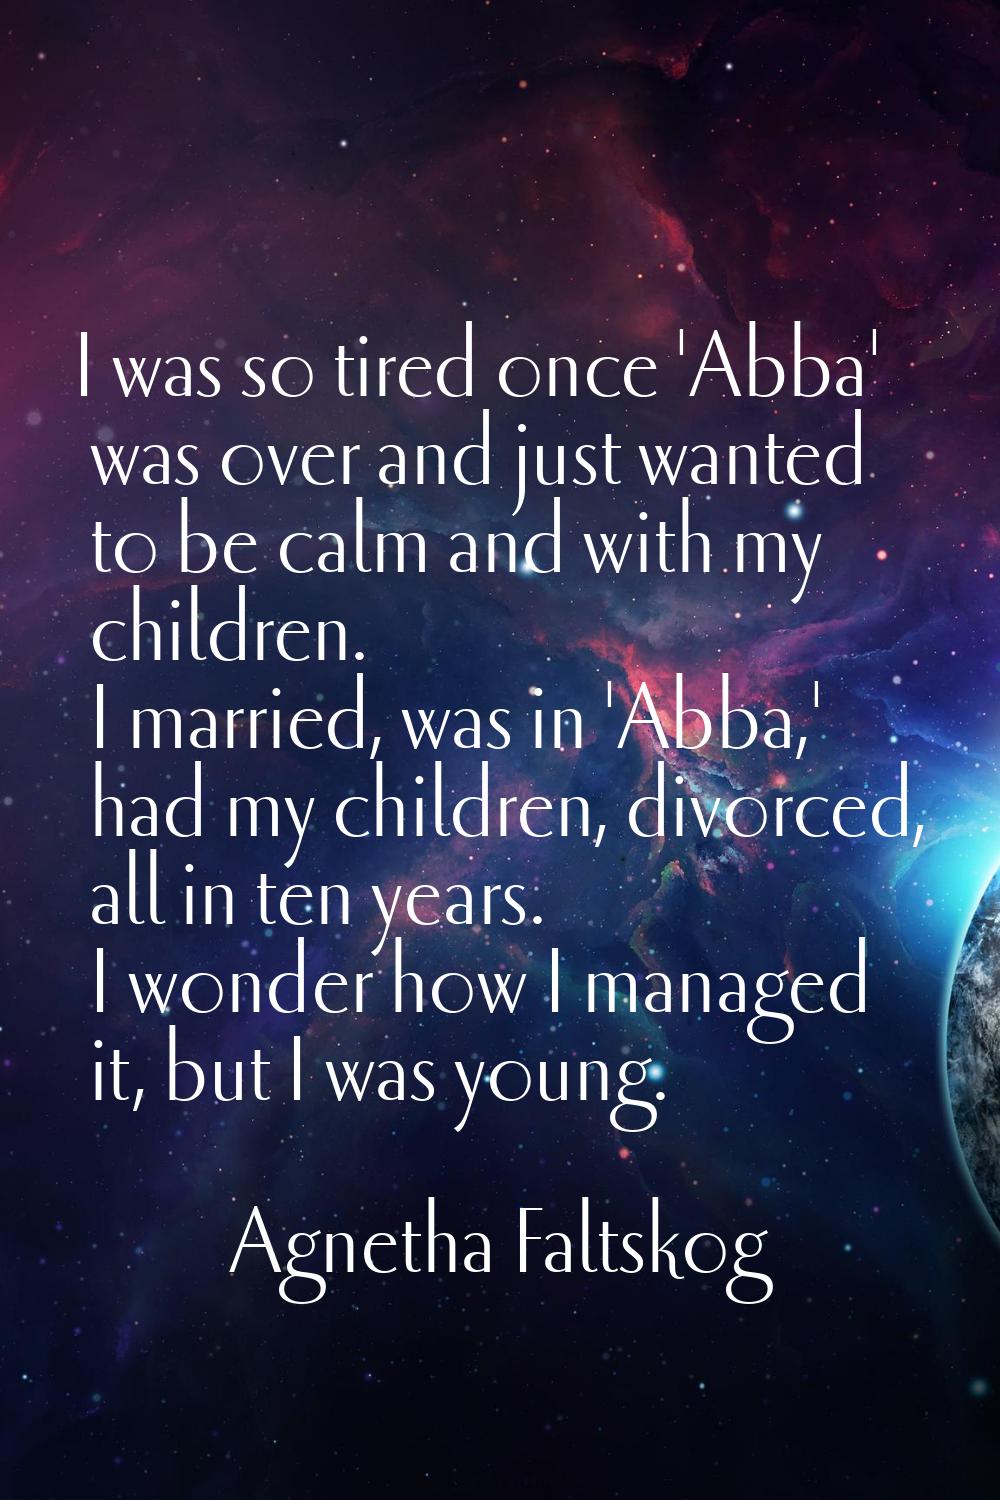 I was so tired once 'Abba' was over and just wanted to be calm and with my children. I married, was